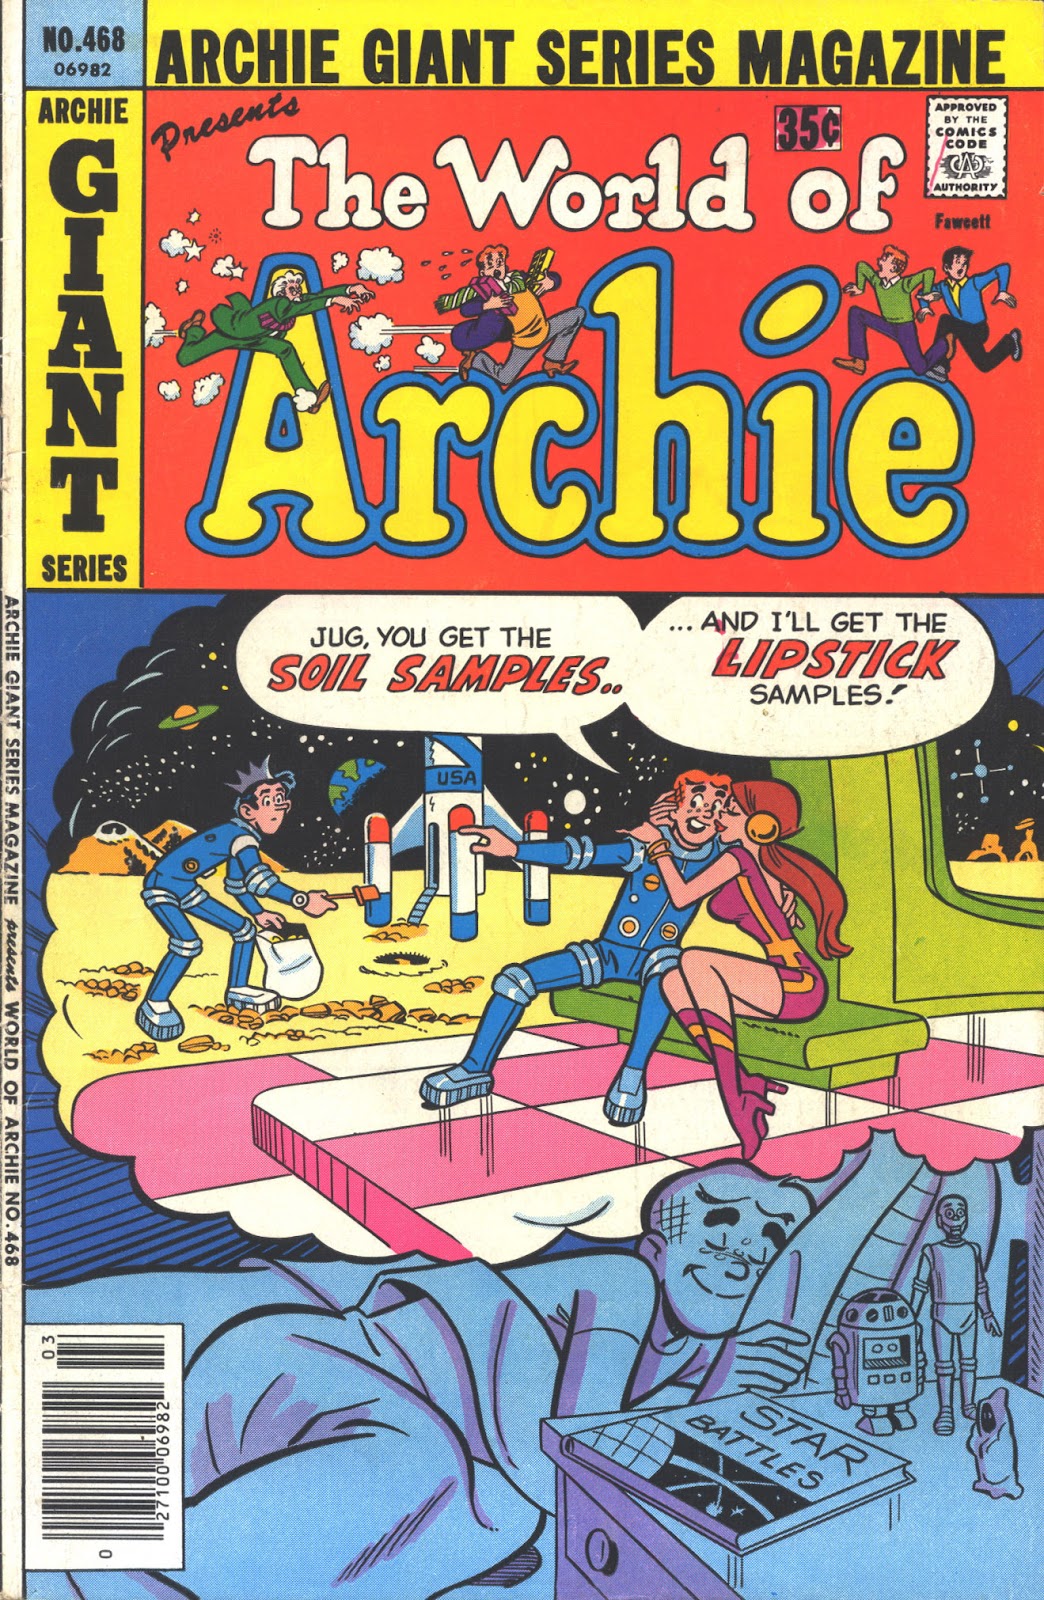 Archie Giant Series Magazine 468 Page 1